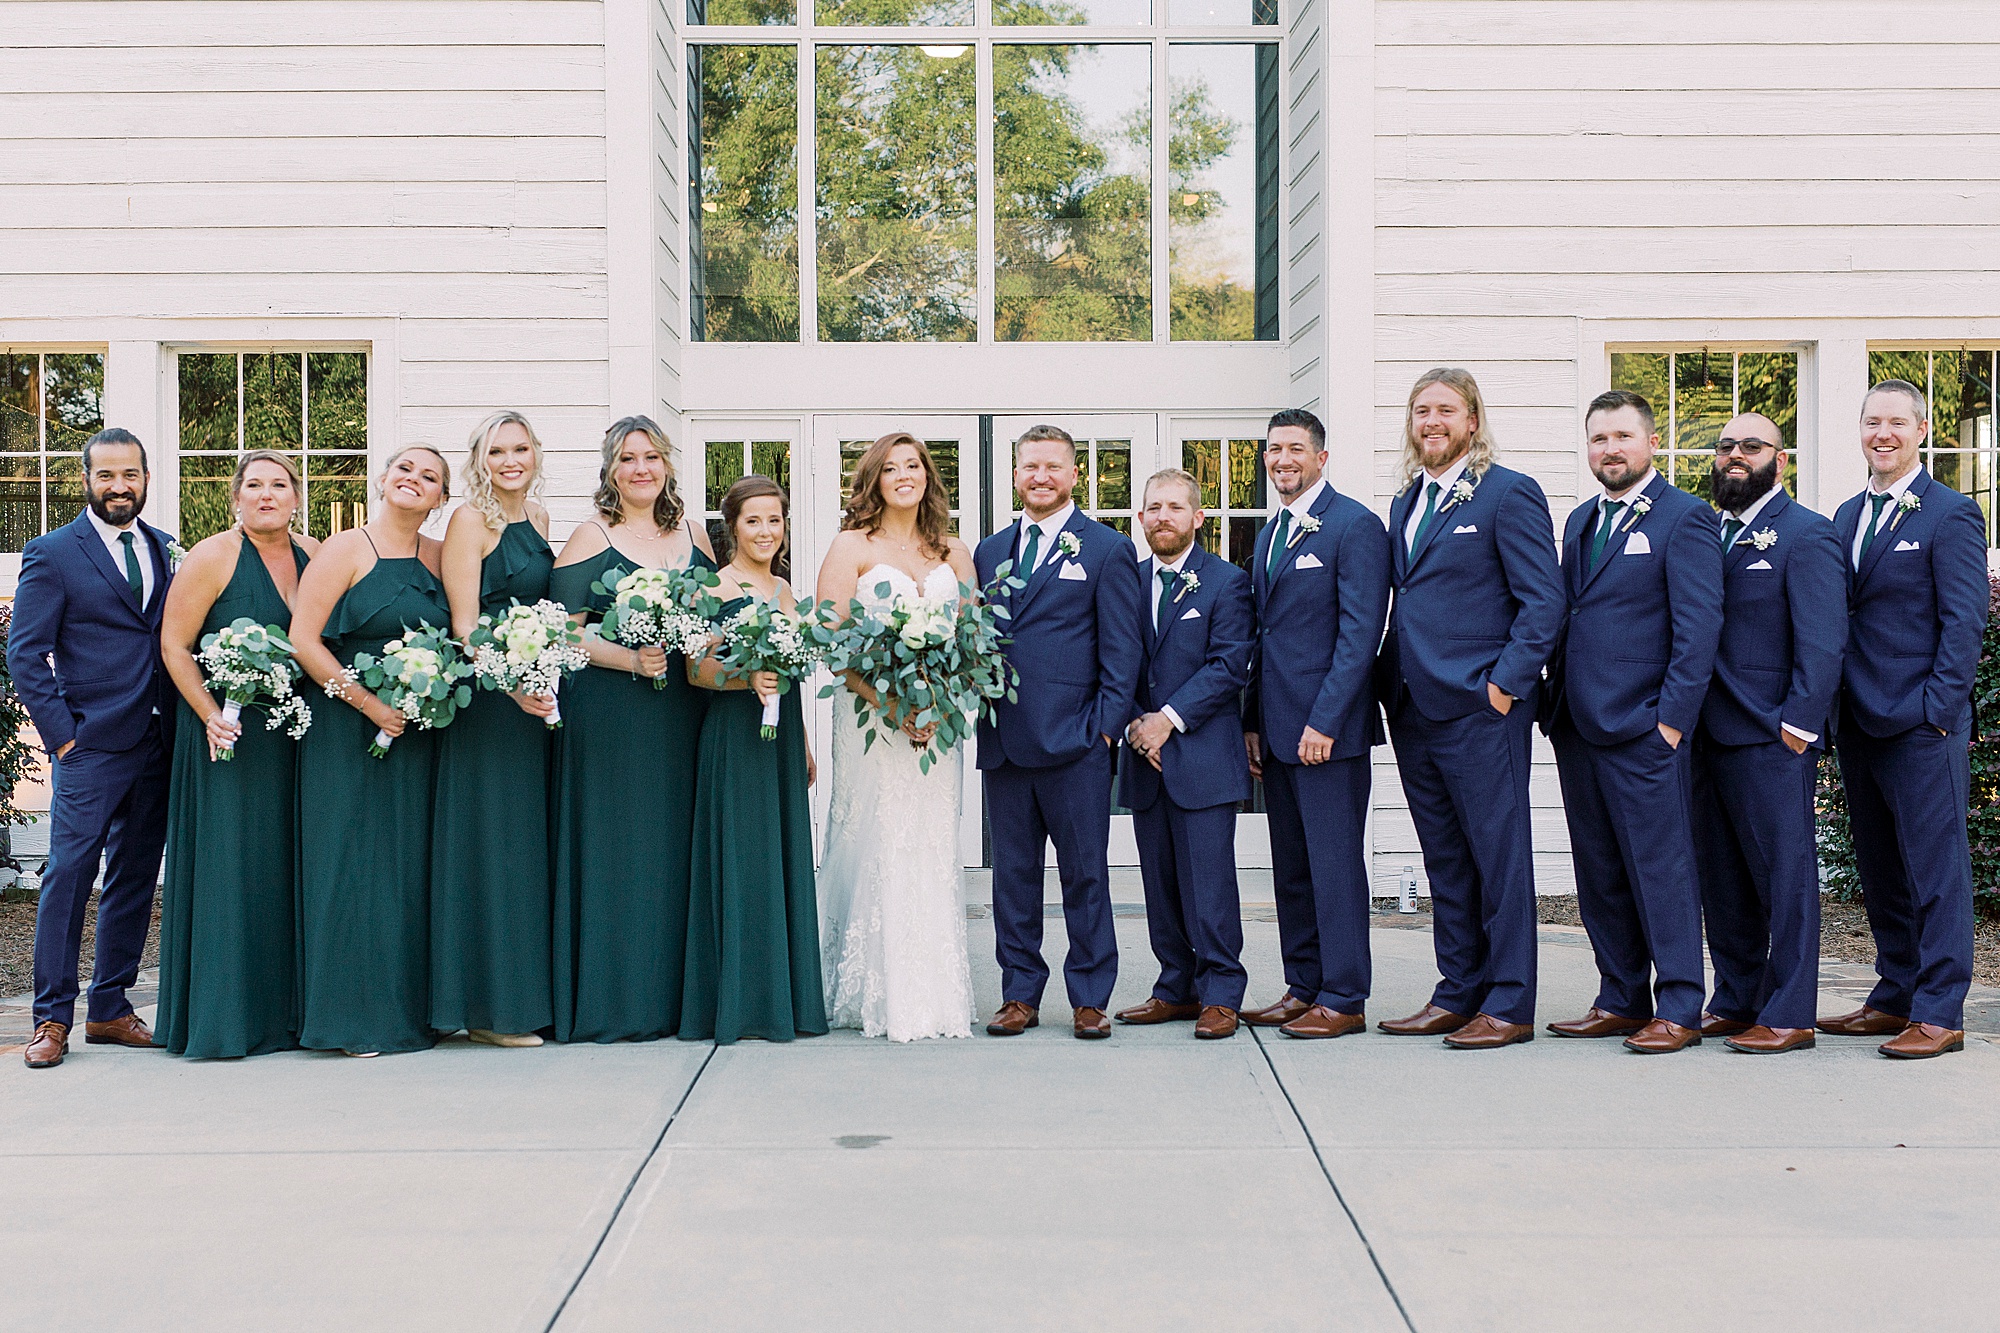 bride and groom pose with wedding party in emerald and navy attire